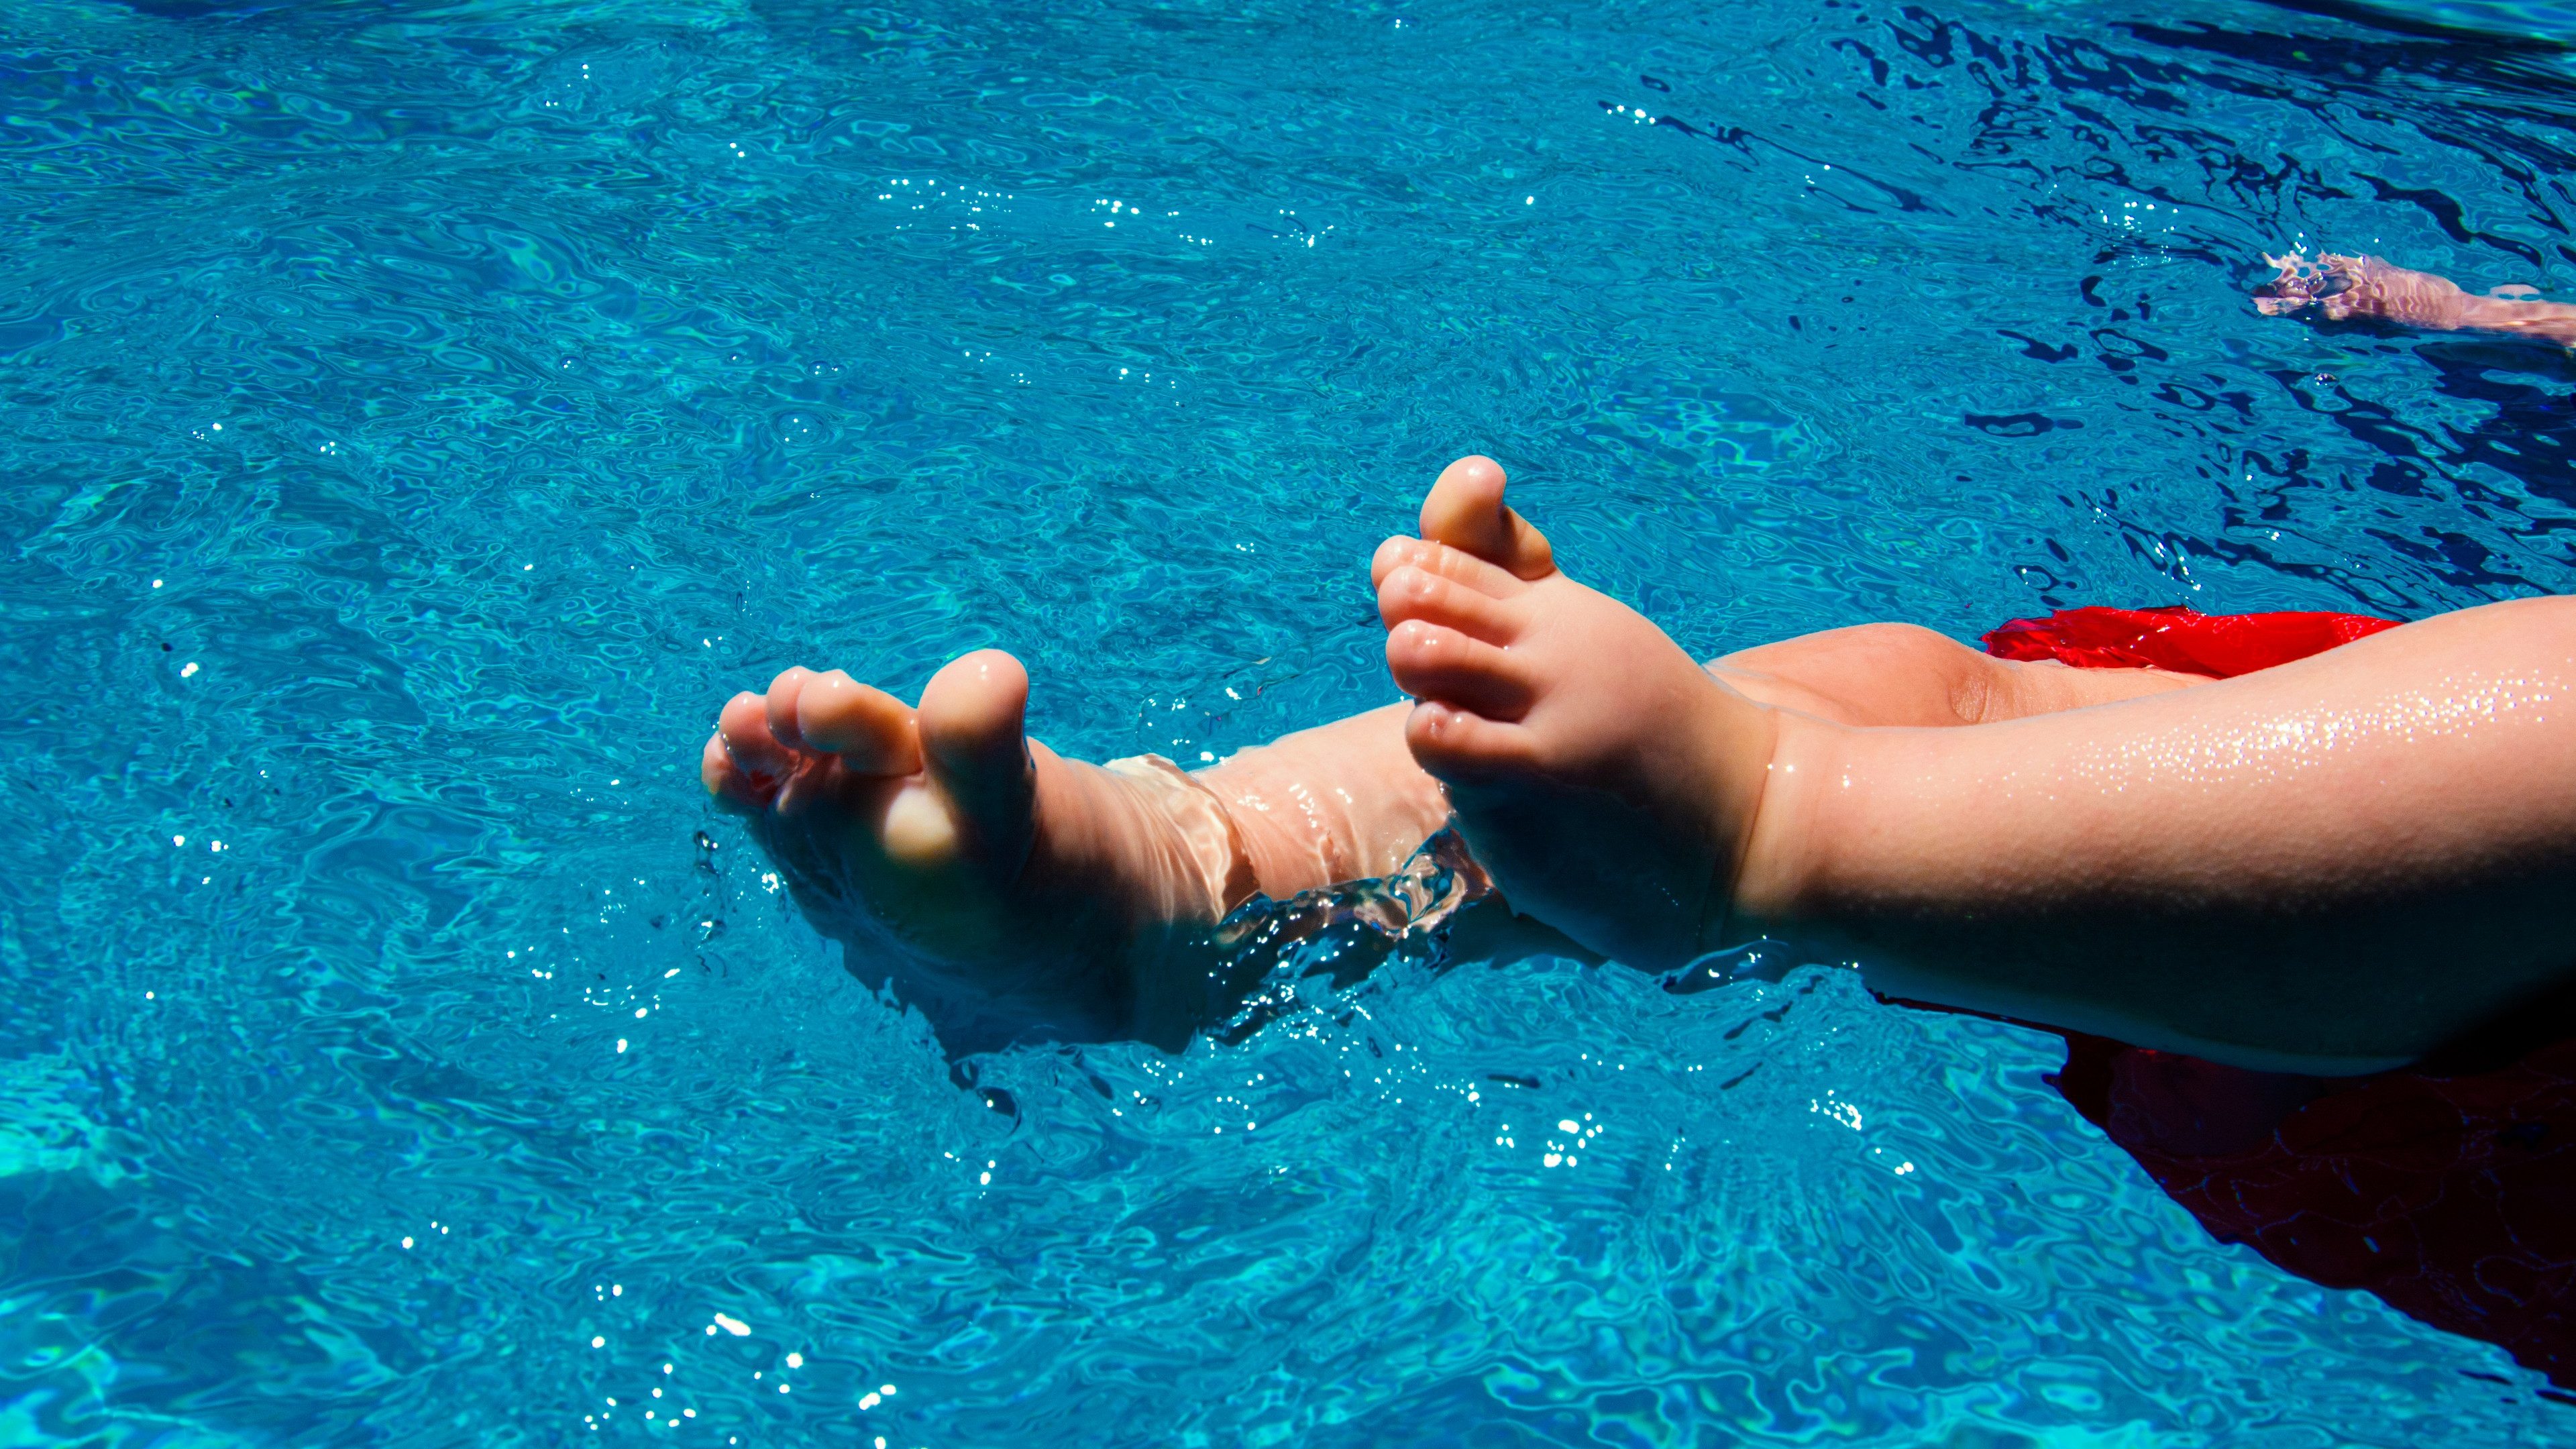 A 6 month old baby relaxing in swimming pool in the summer.